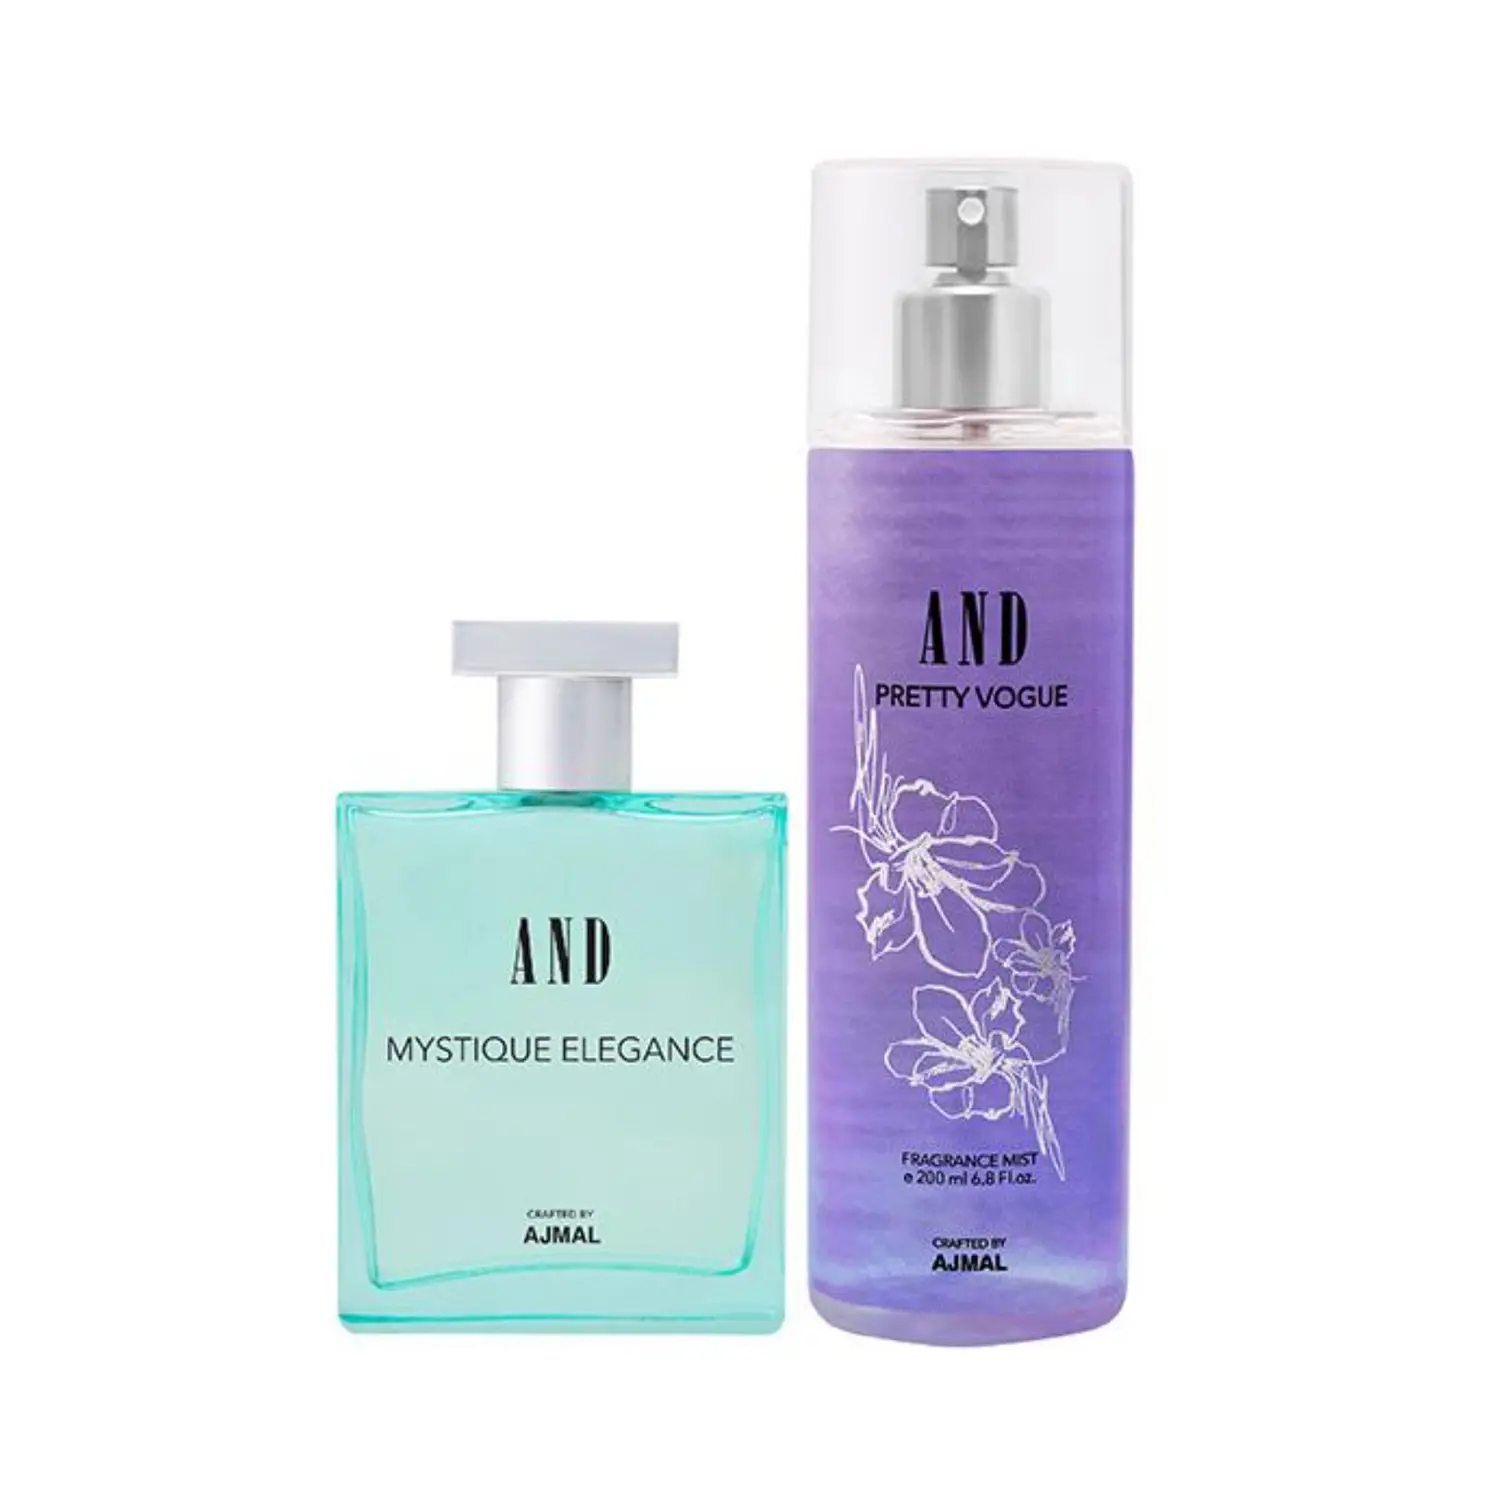 AND | AND Eternal Radiance EDP & Pretty Vogue Mist - (2Pcs)